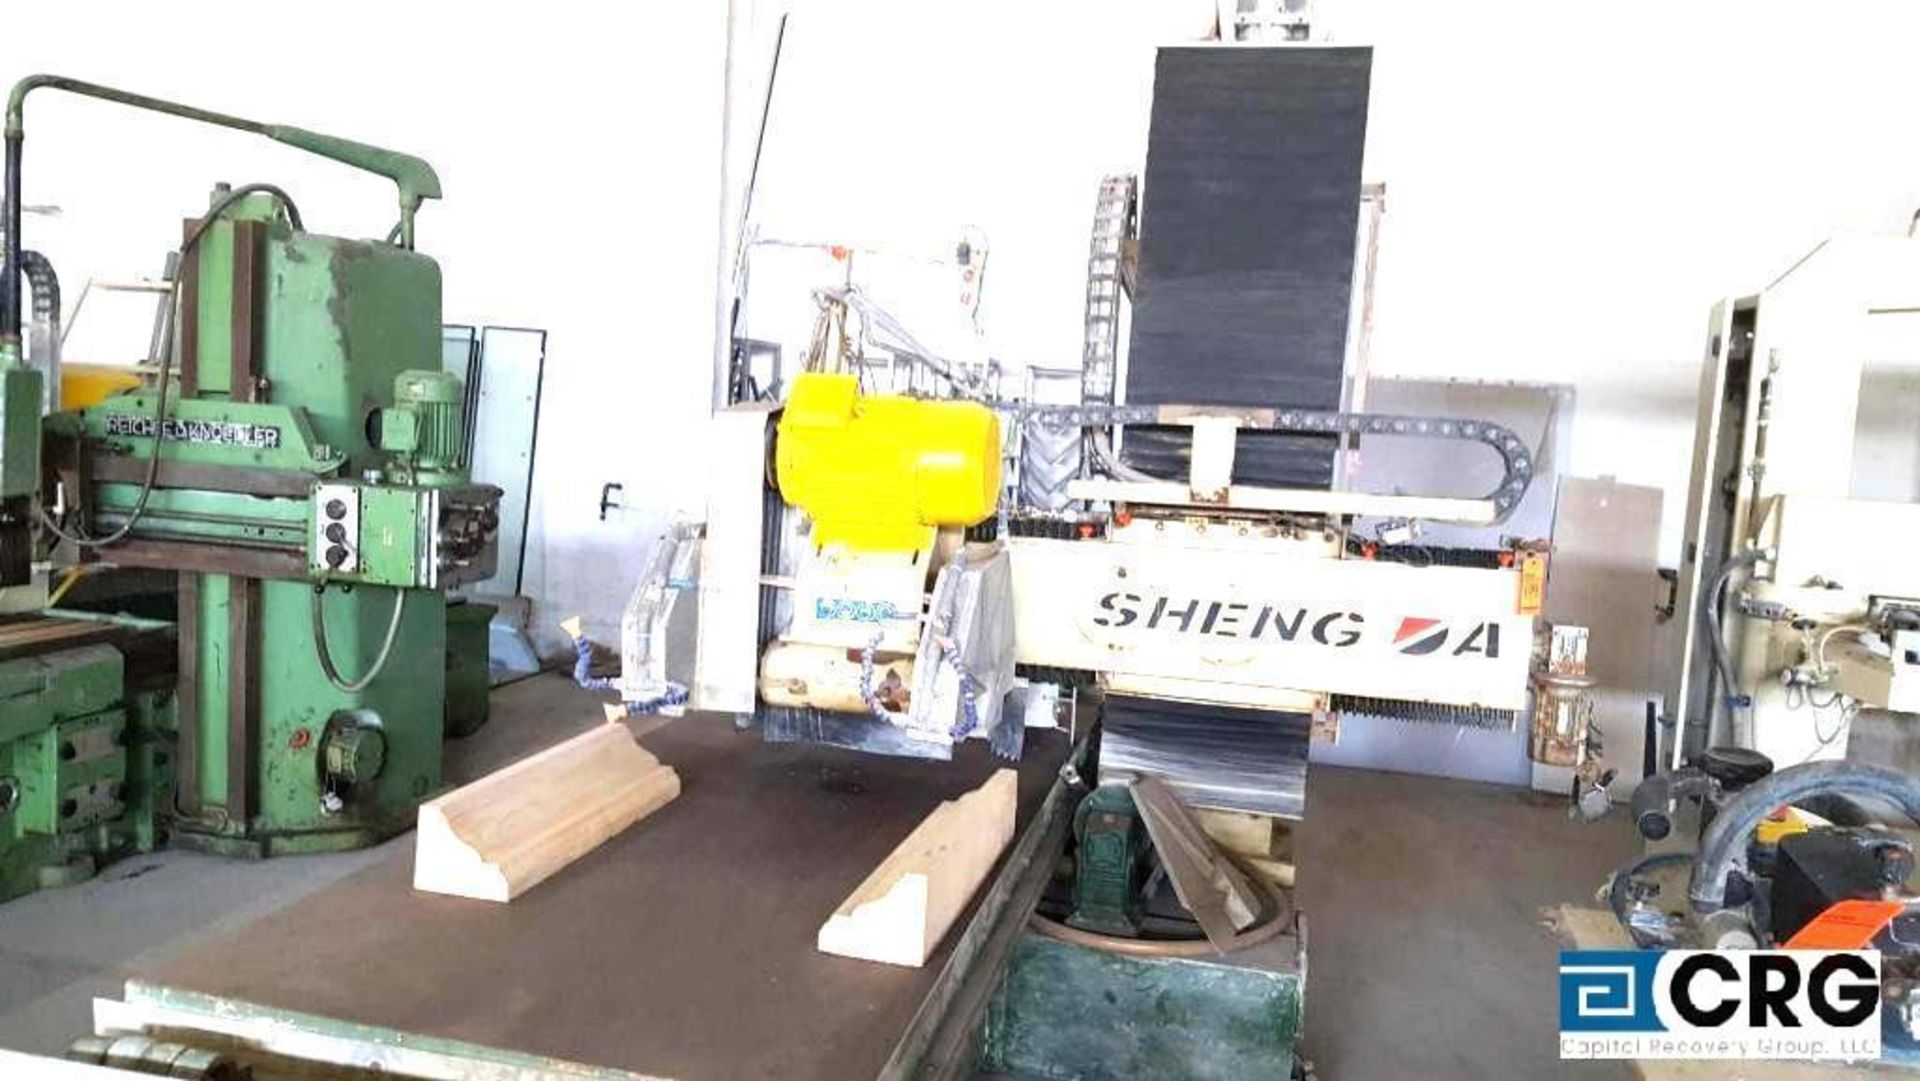 2009 Sheng A twin spindle, stone profiling machine, with template reader and transformer, DNFX- - Image 2 of 2